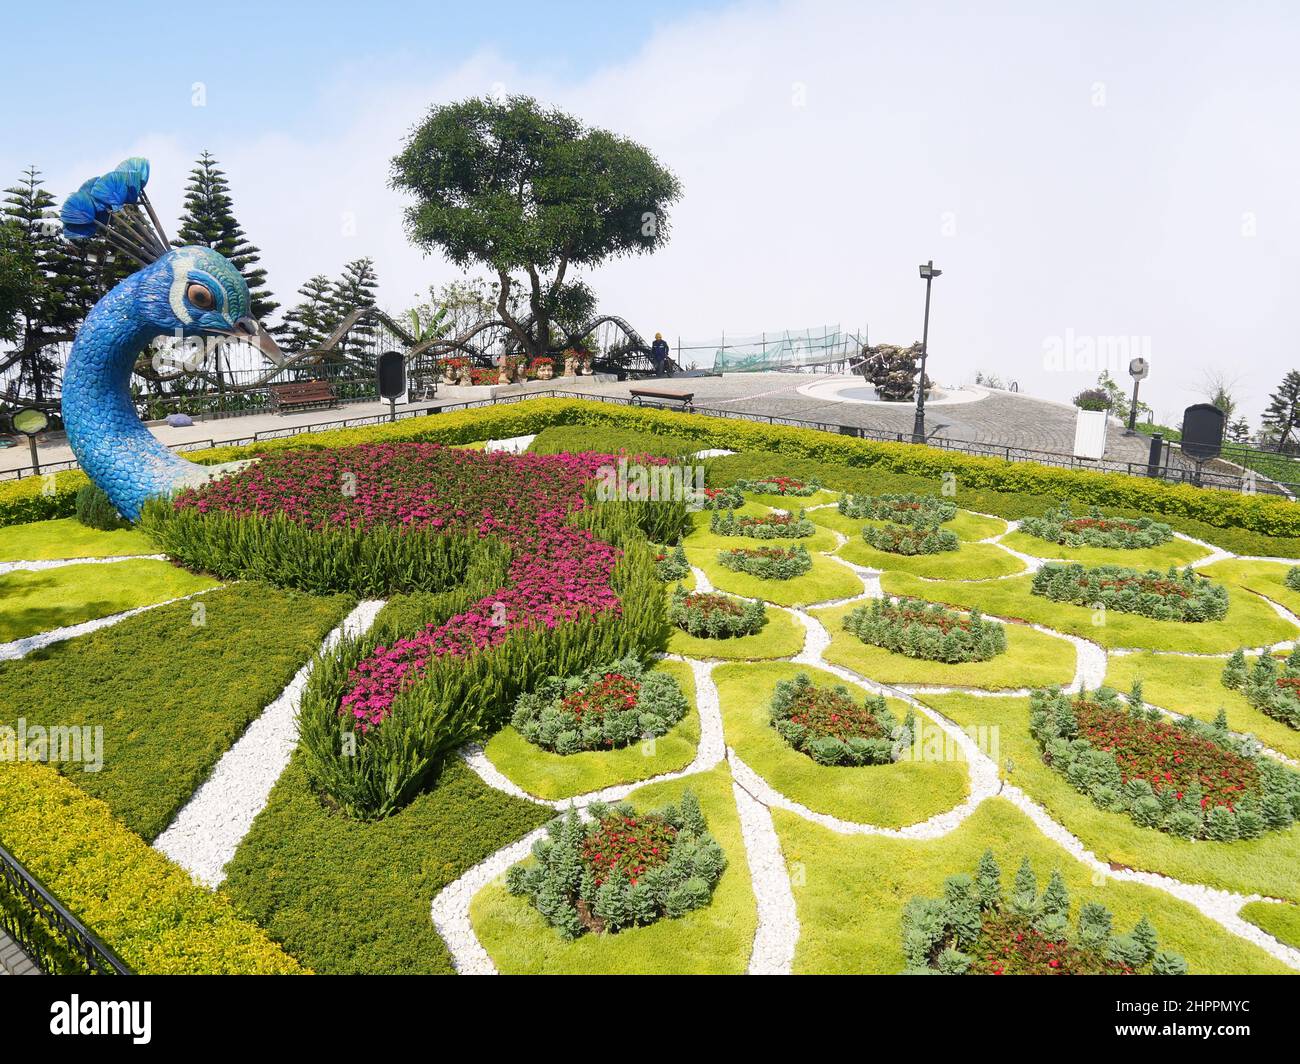 Da Nang, Vietnam - April 12, 2021: Flowers decorated as peacock at Ba Na hills, a famous theme park and resort in Central Vietnam Stock Photo